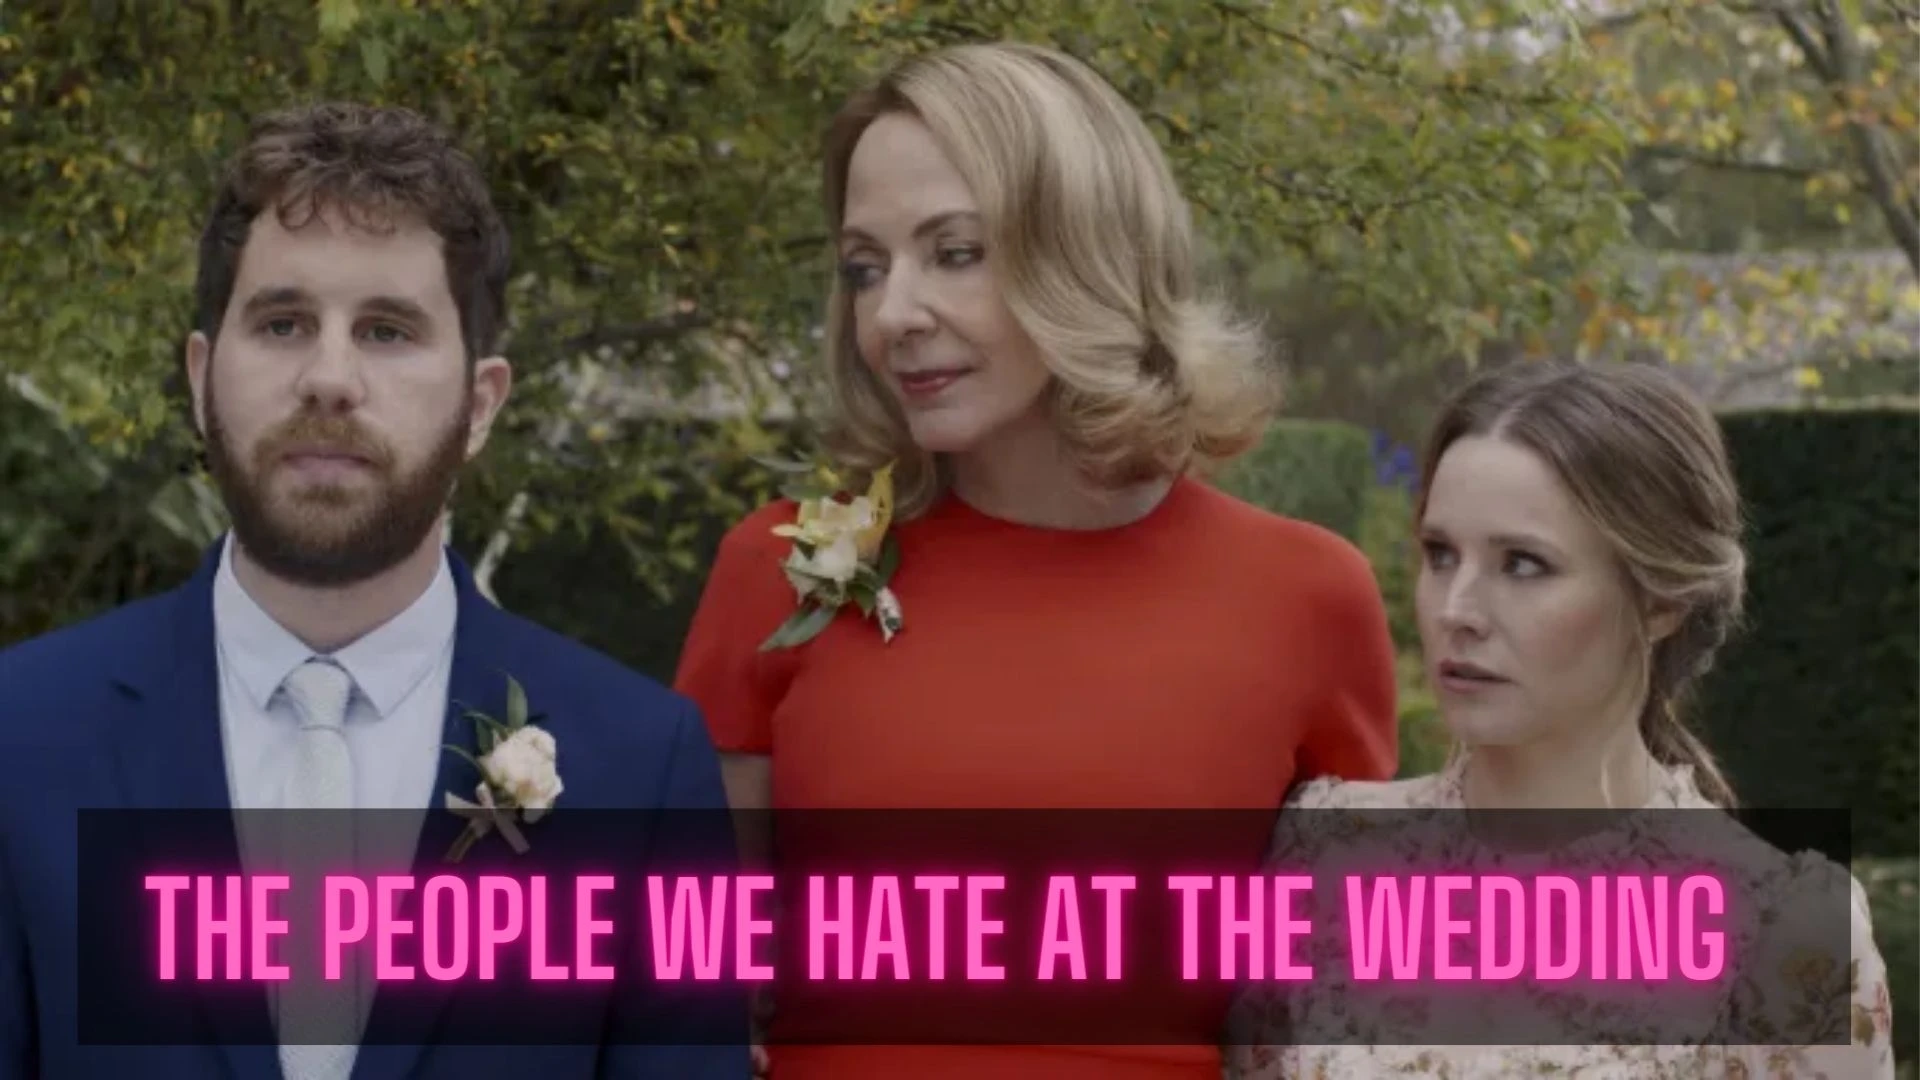 The People We Hate at the Wedding Parents Guide | Age Rating